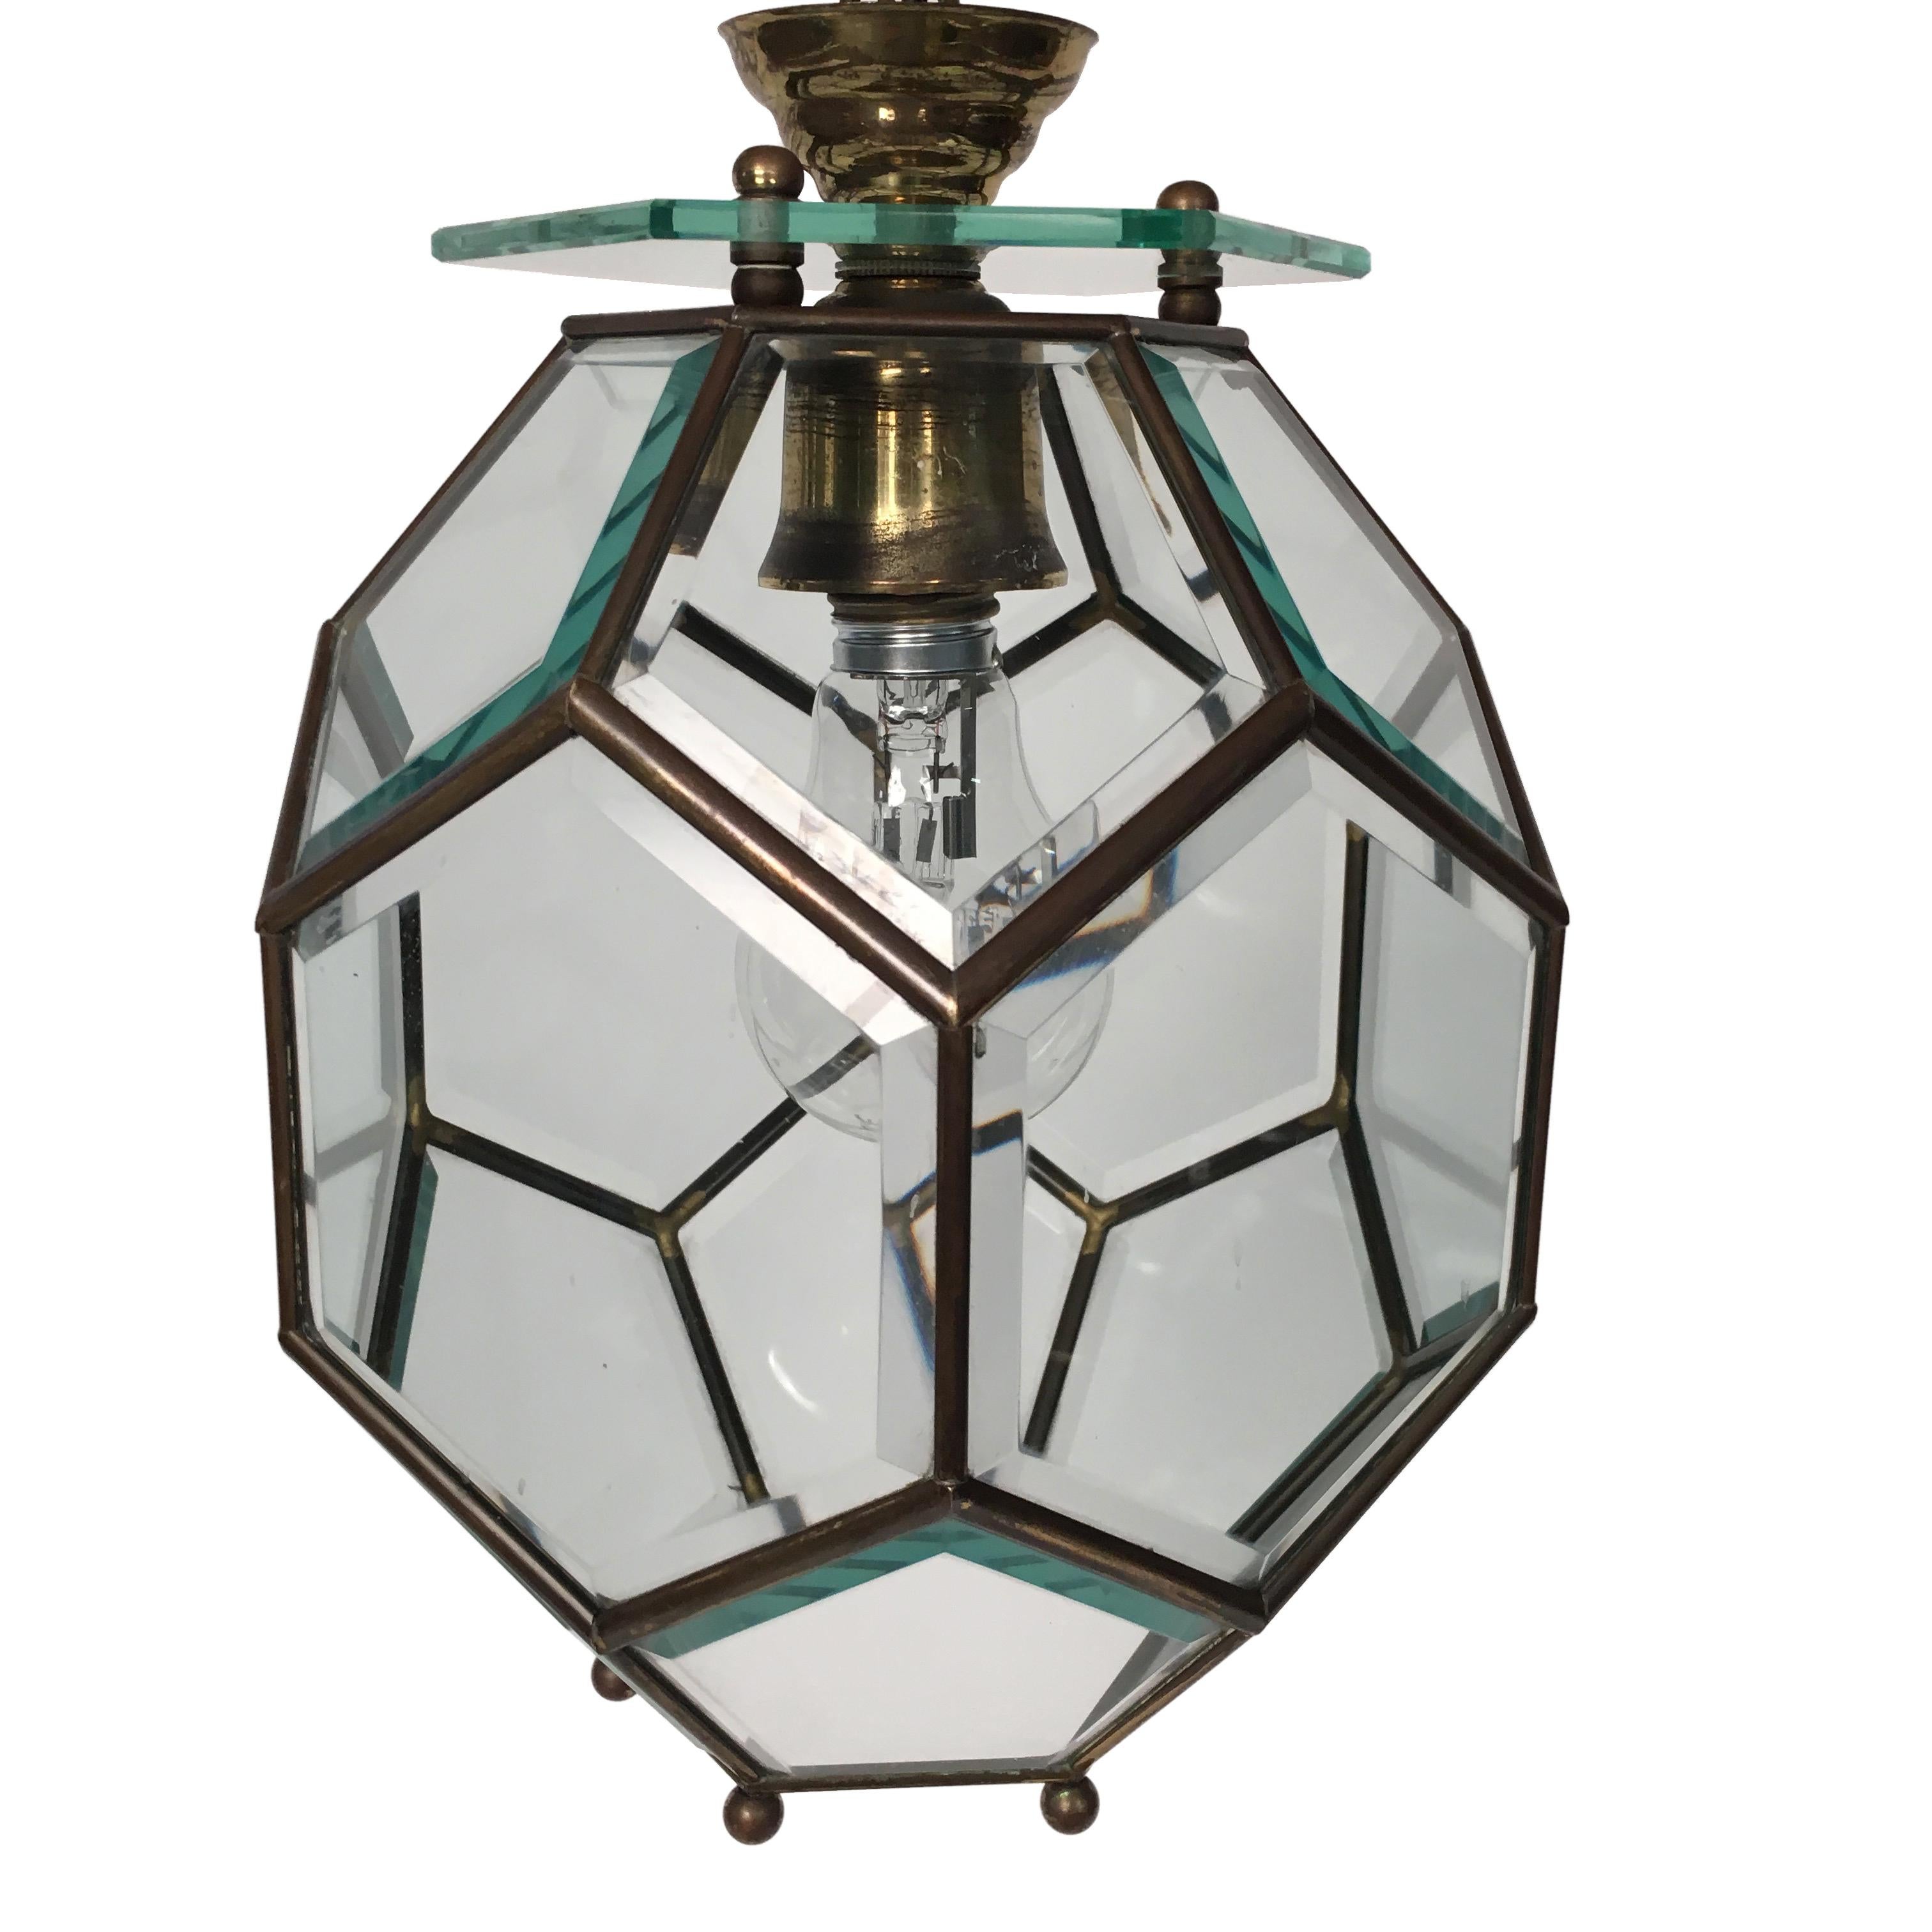 Italian Mid-Century Modern Chandelier in Brass and Glass Attributed to Fontana Arte